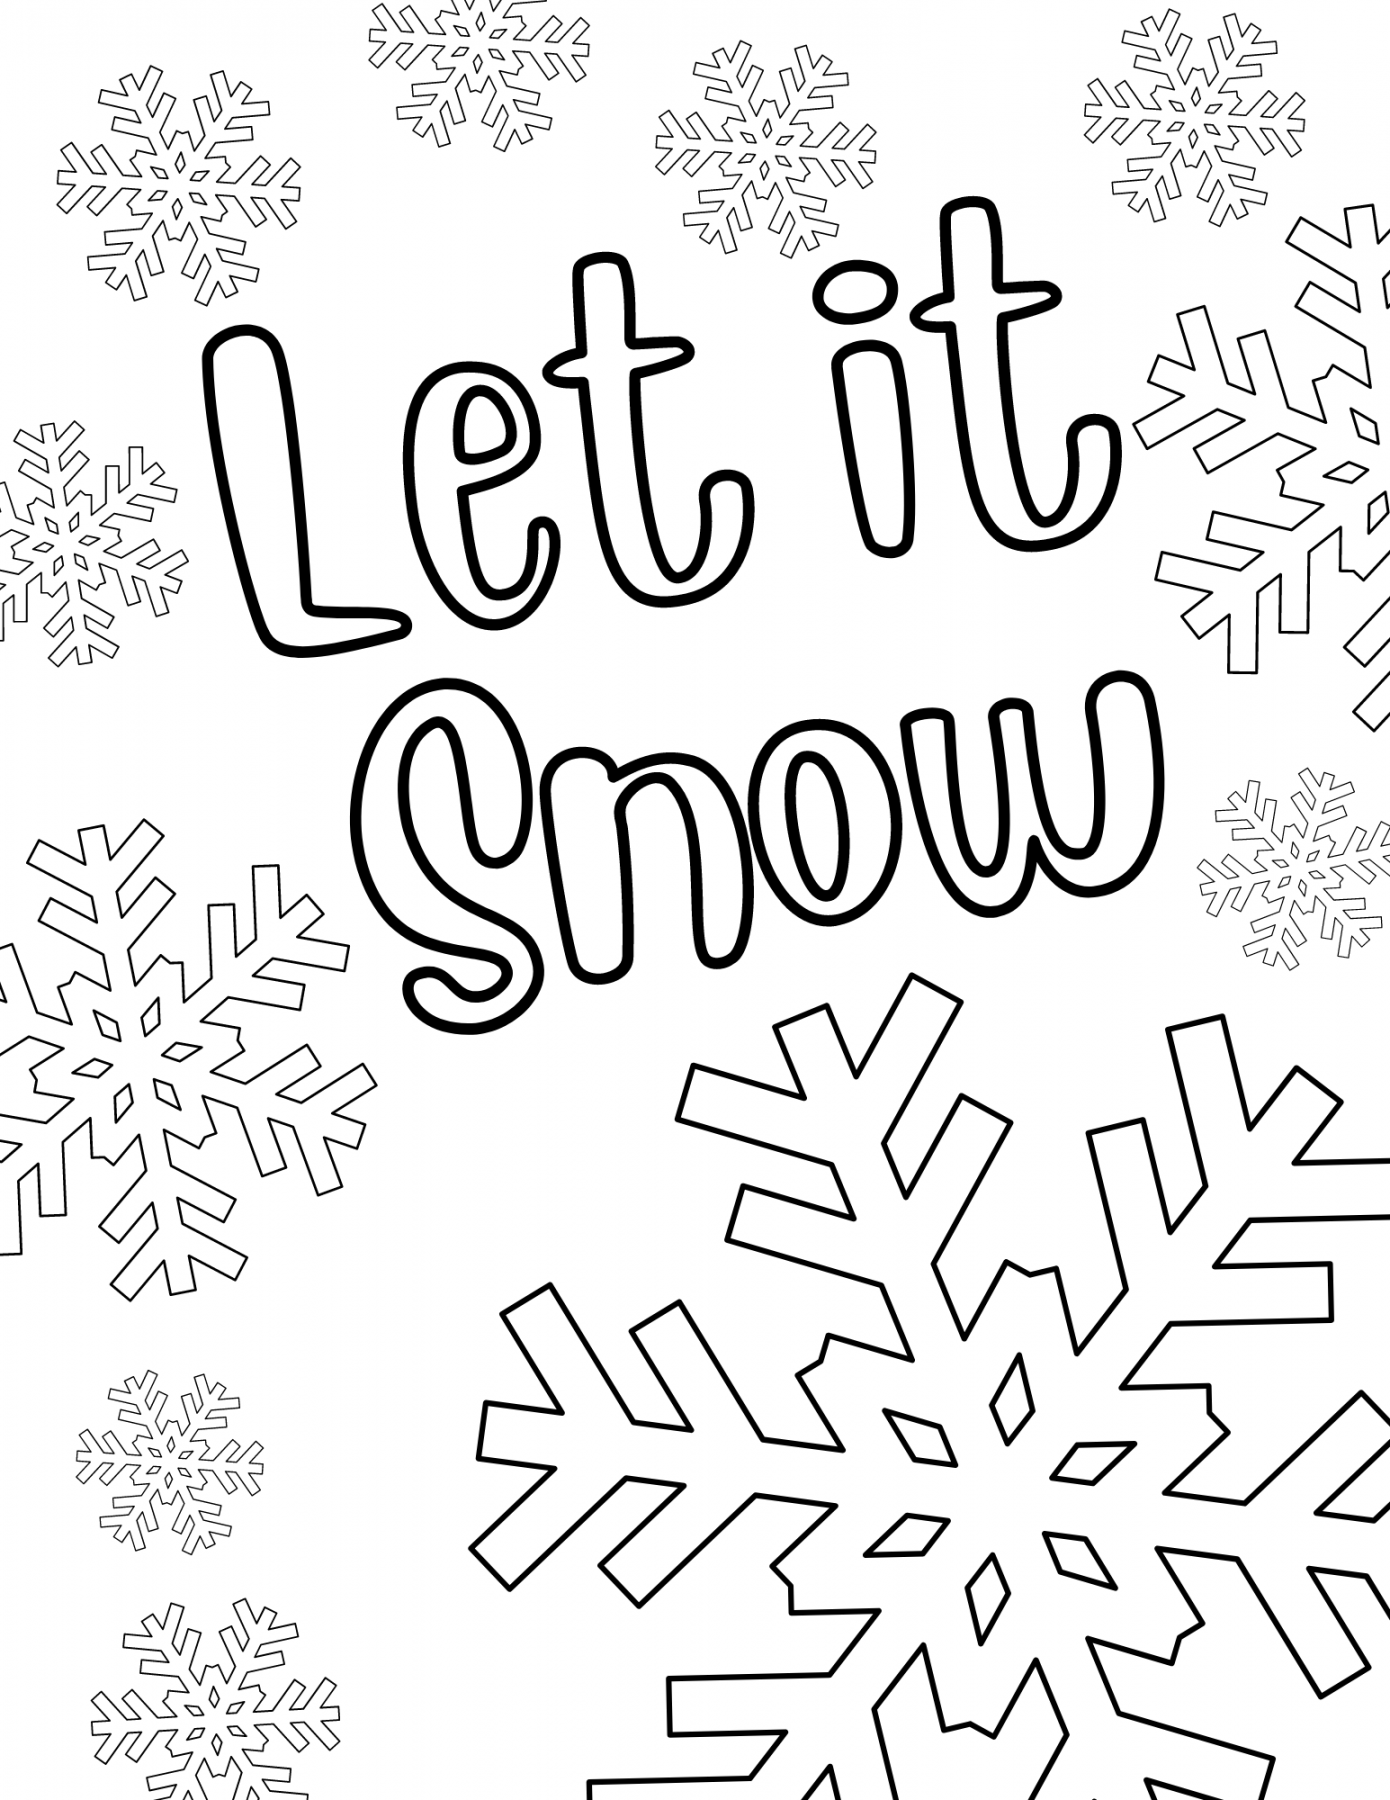 Free Printable Winter Coloring Pages for Kids - FREE Printables - Winter Coloring Pages Free Printable